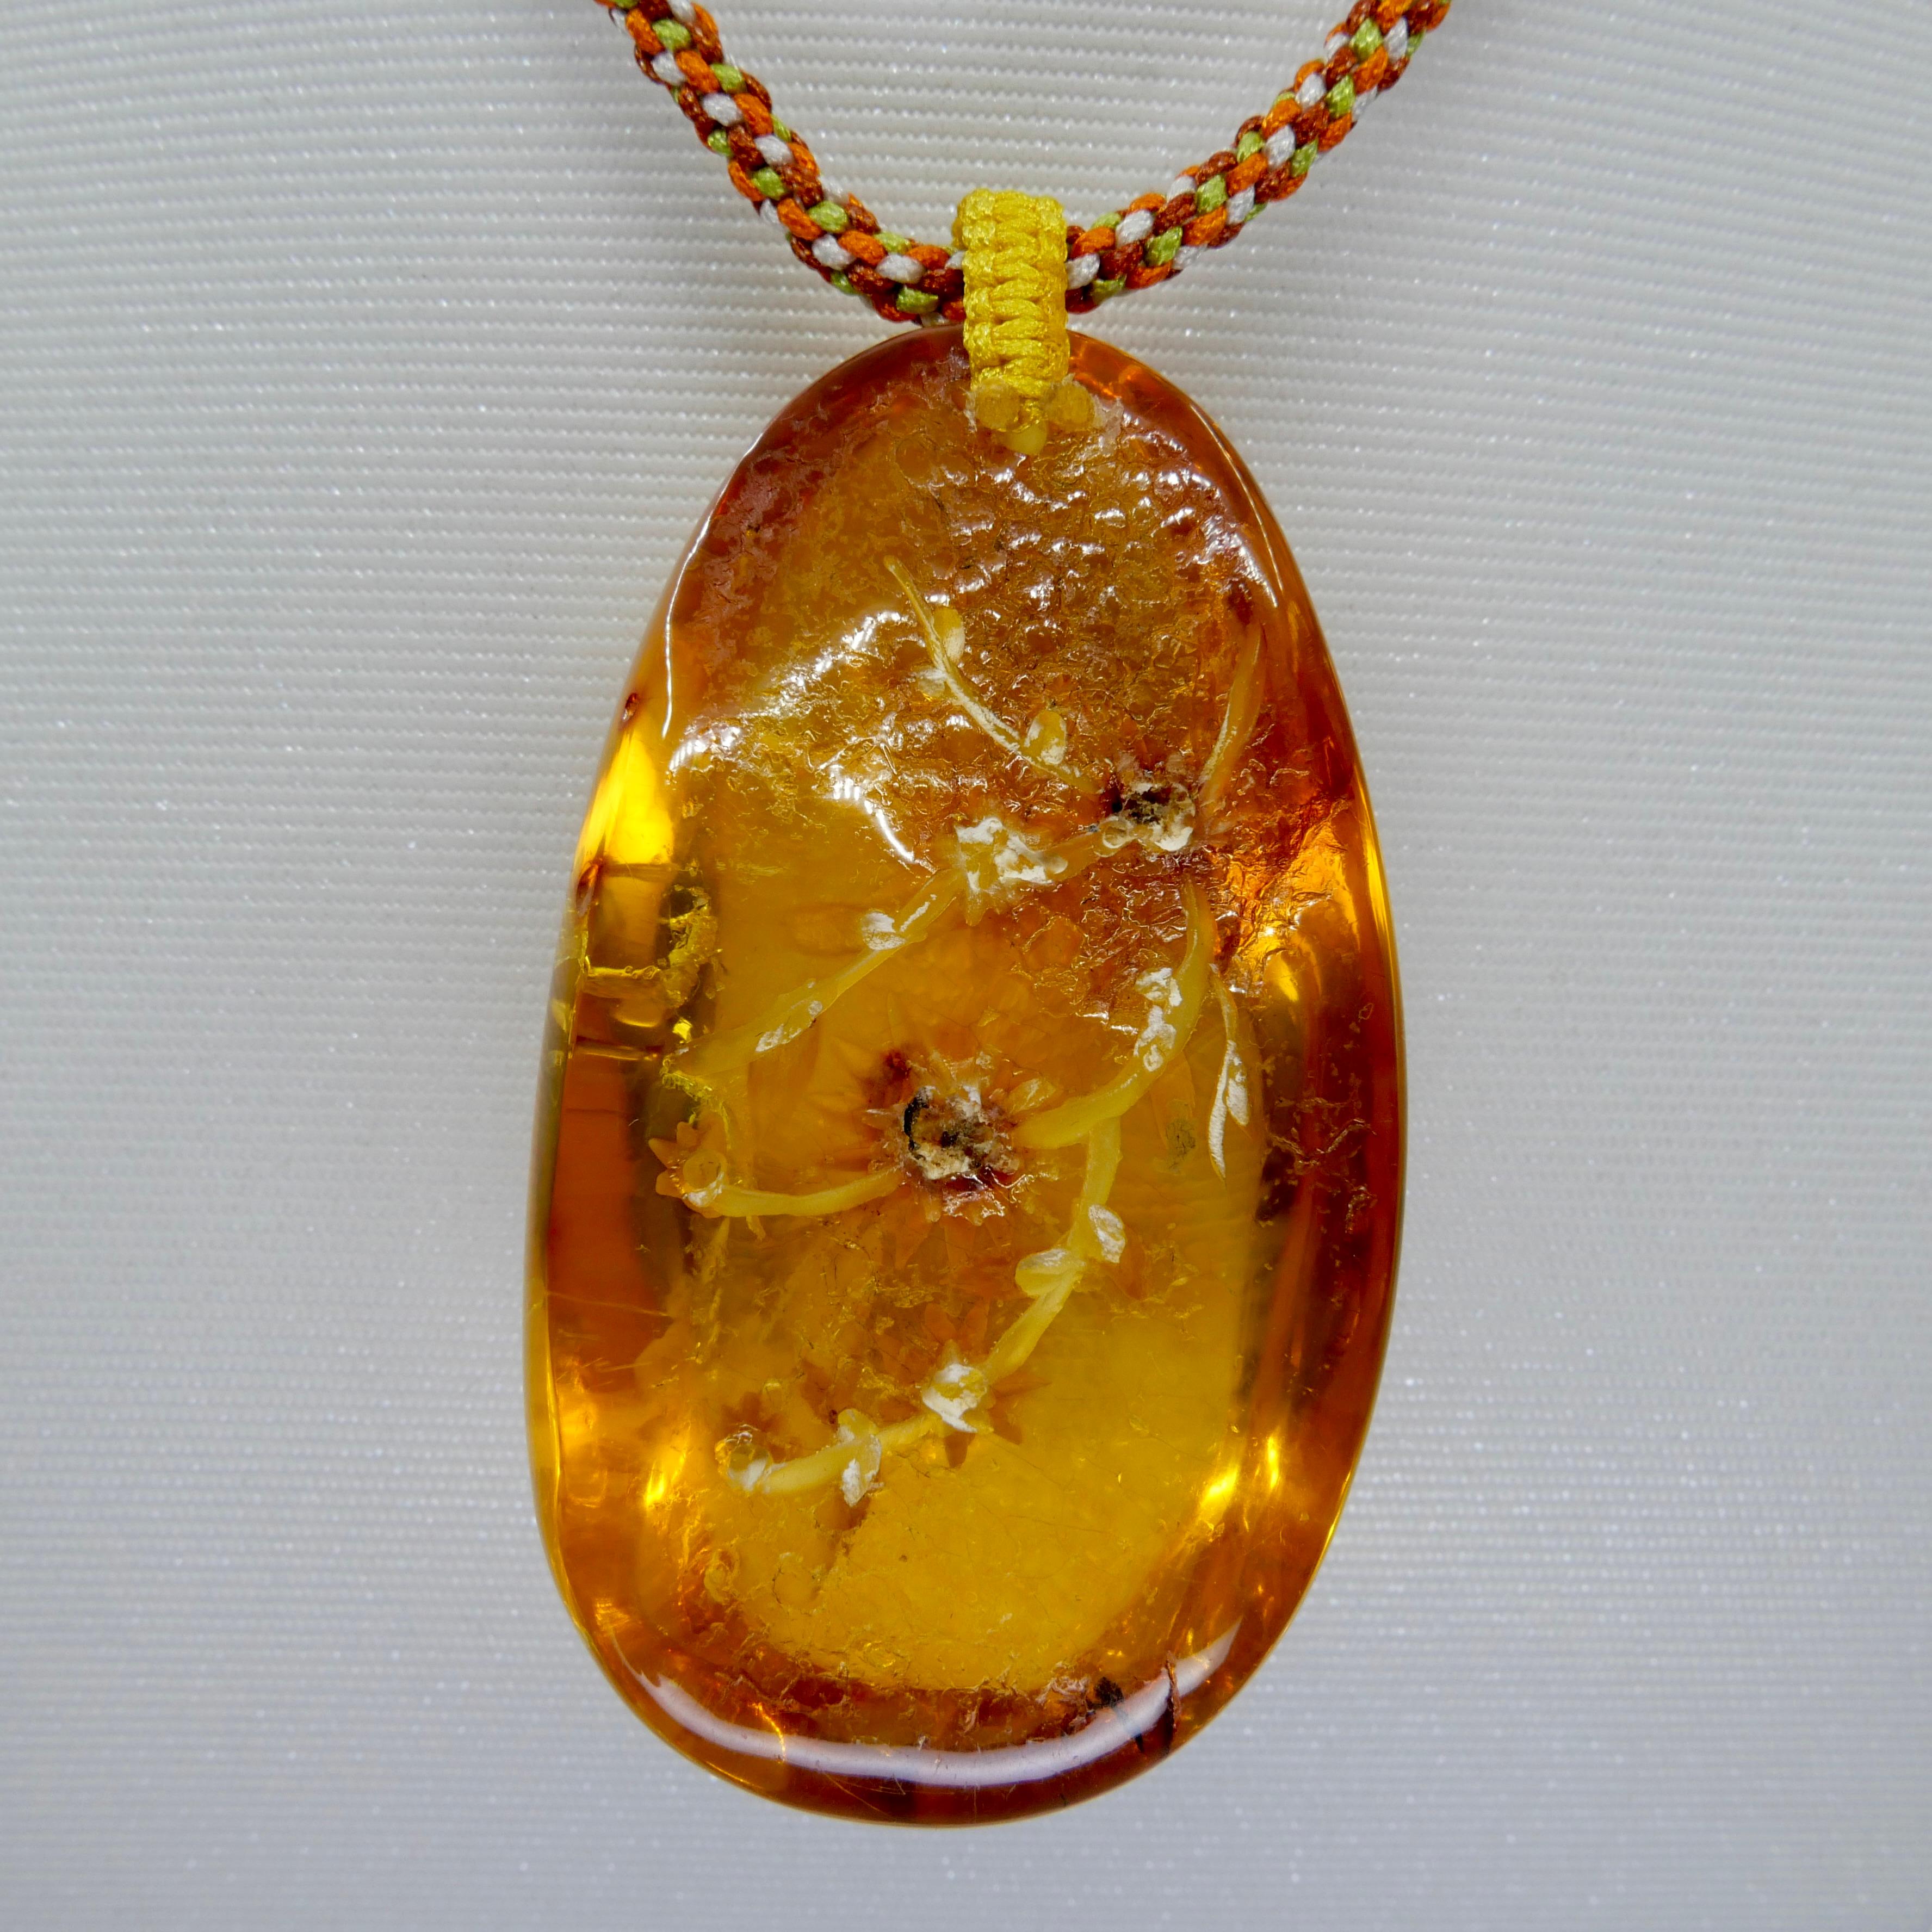 Women's or Men's Certified 187 Carat Natural Amber Flower Pendant Necklace, Statement Jewelry For Sale